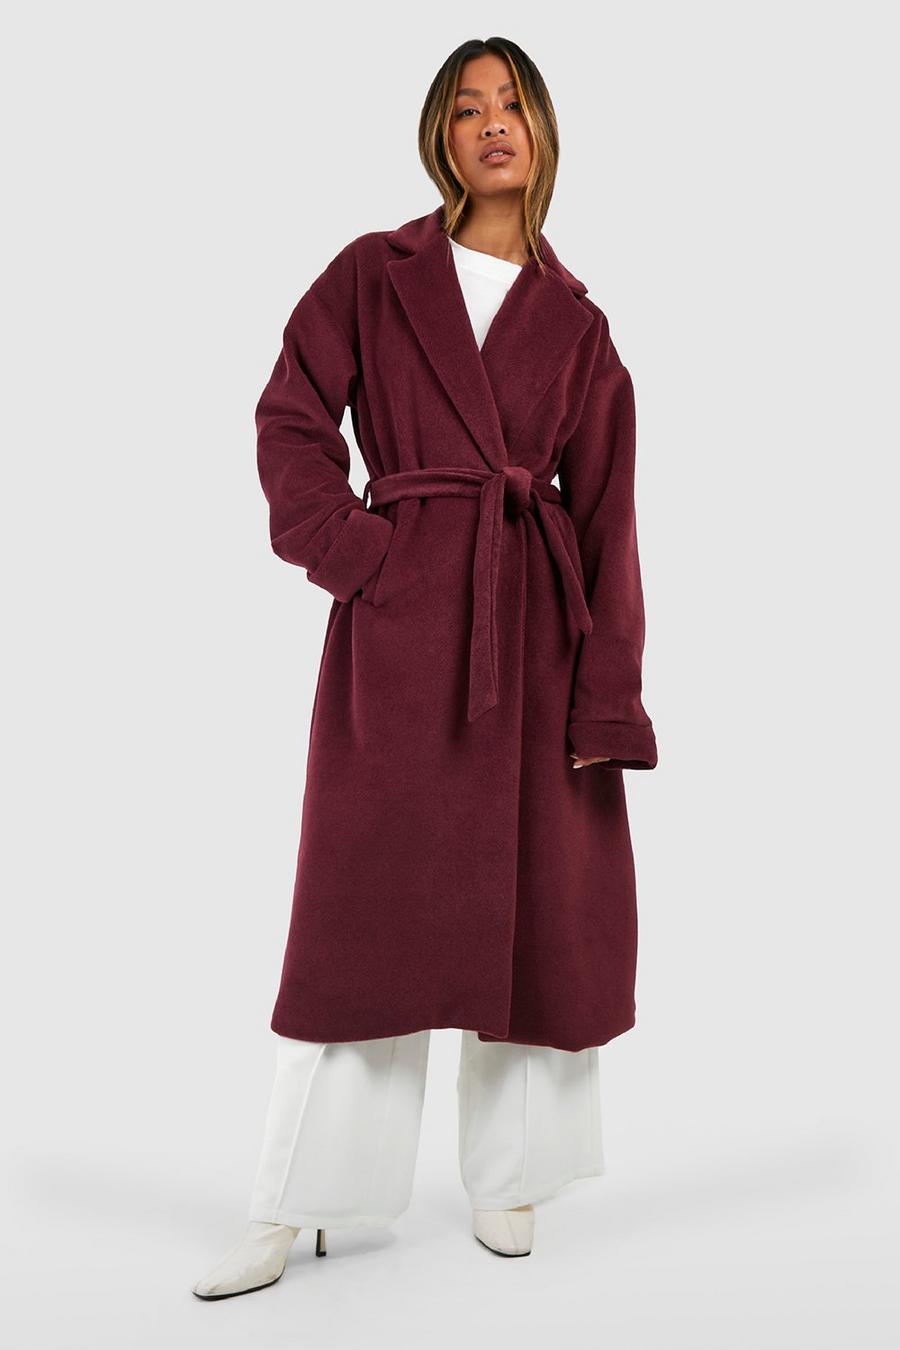 Wine Cuff Detail Belted Textured Wool Look Coat